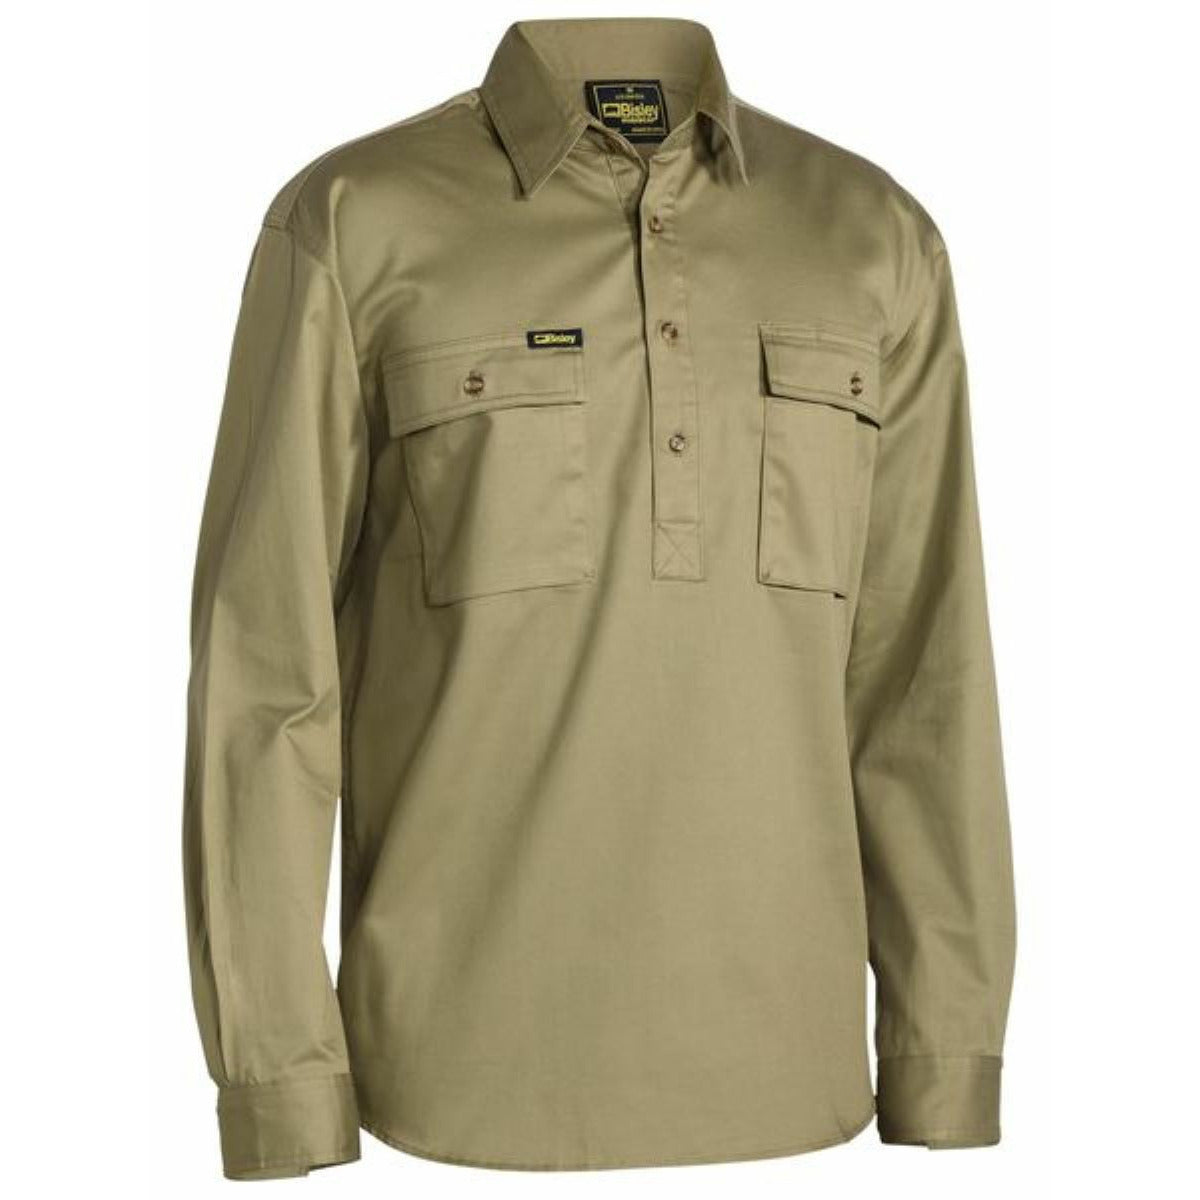 Bisley Closed Front Cotton Drill Shirt Long Sleeve